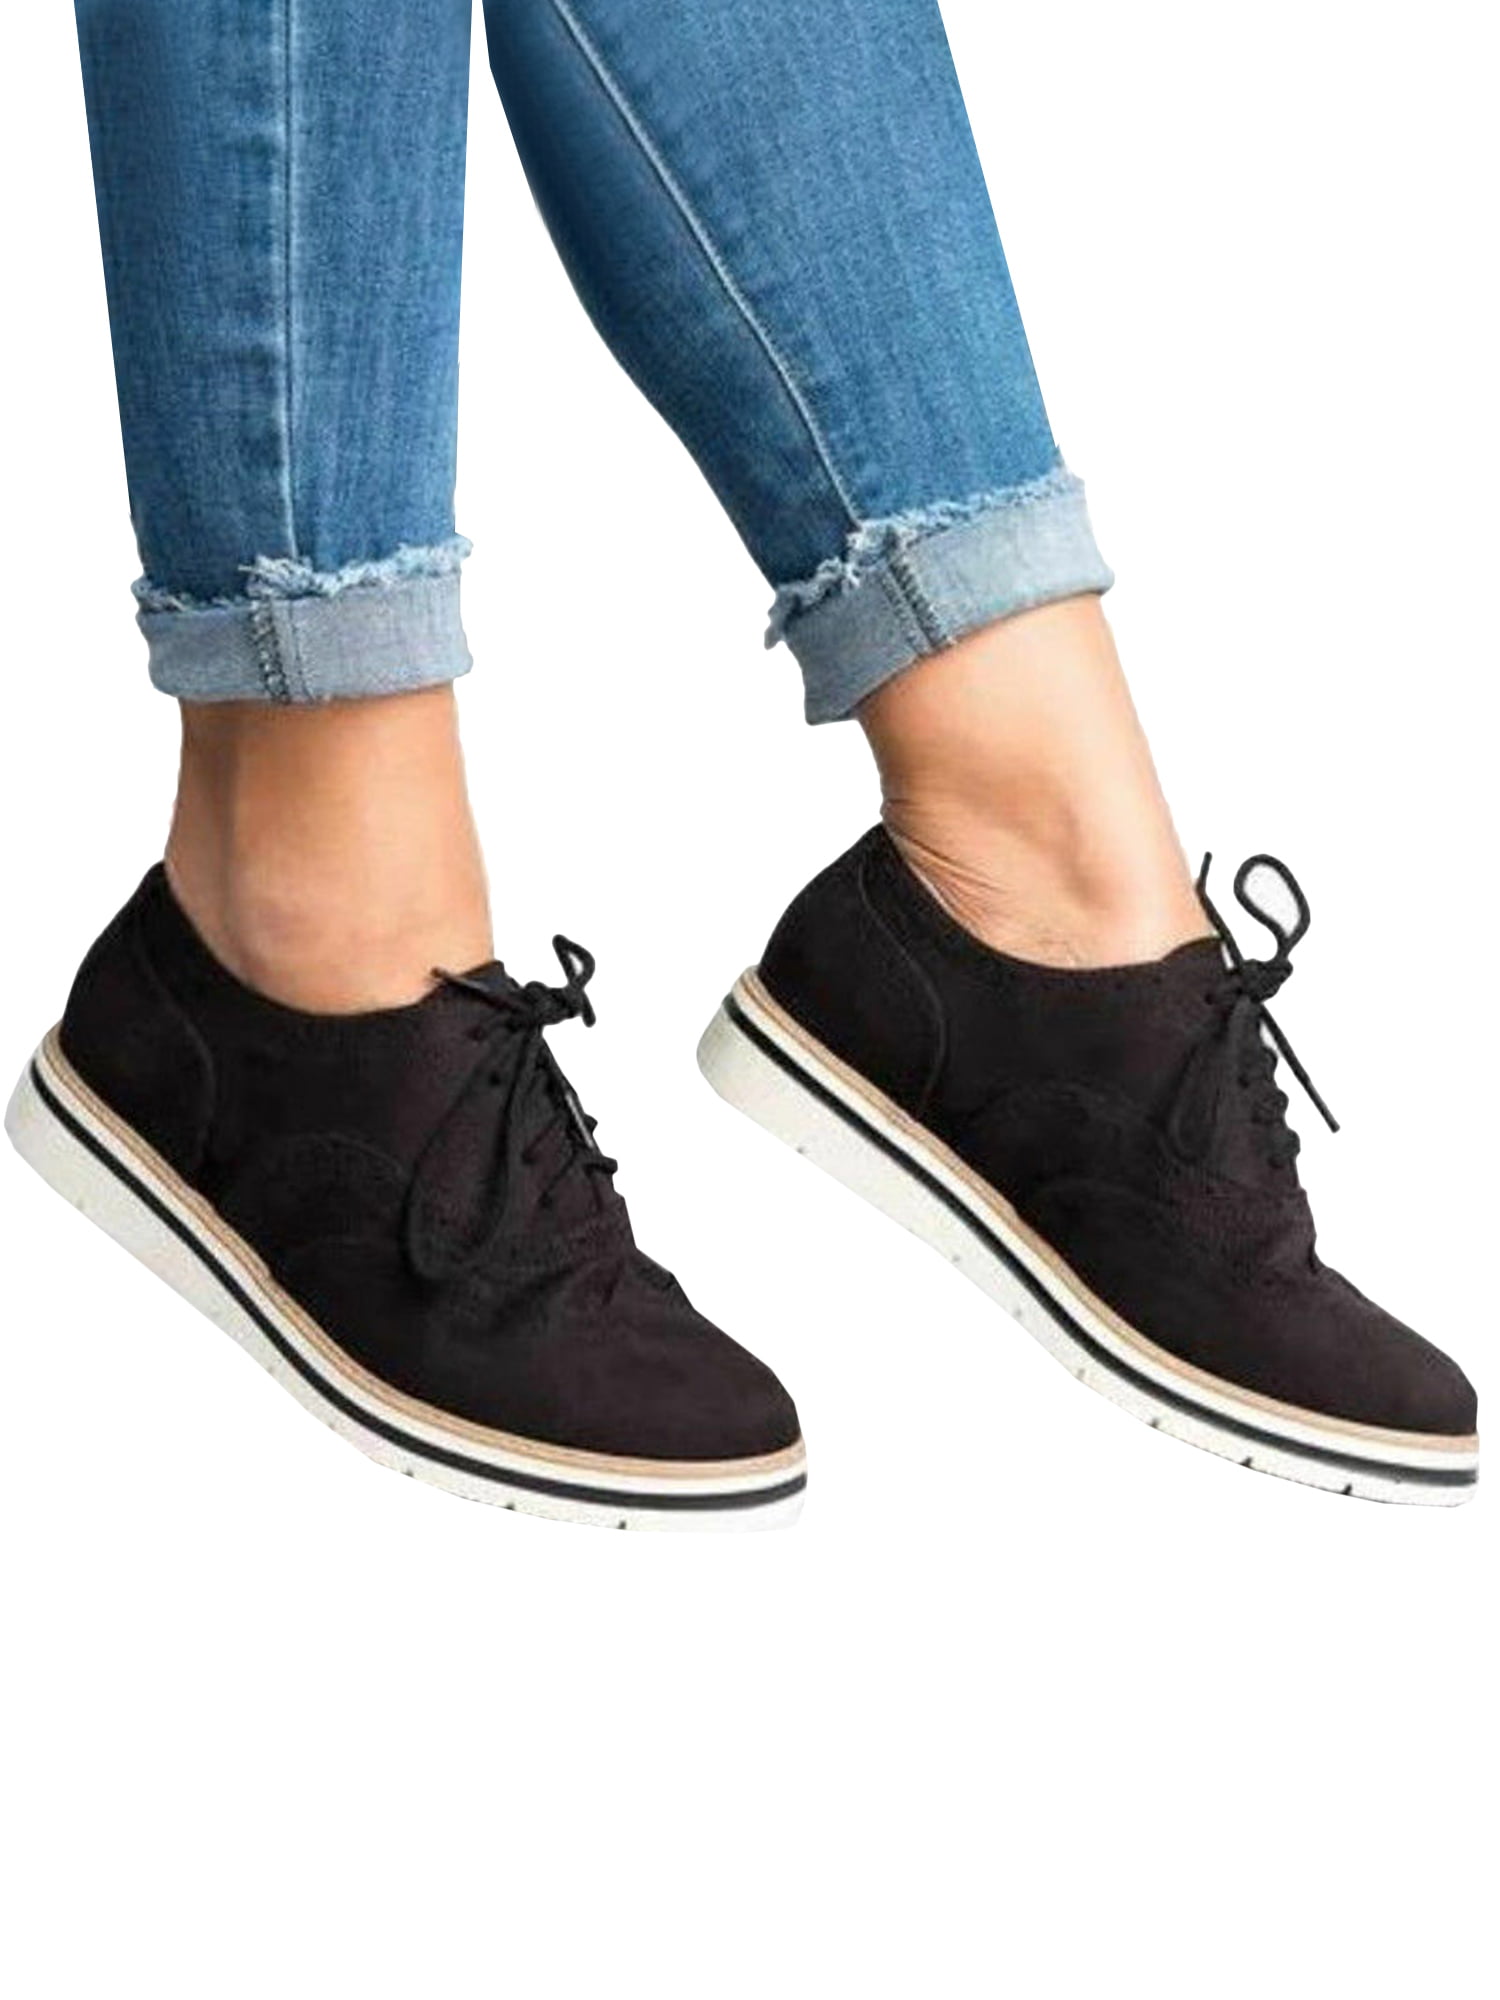 Womens Slip On Mule Sneakers Canvas Casual Sports Flats lace up Loafers Shoes 